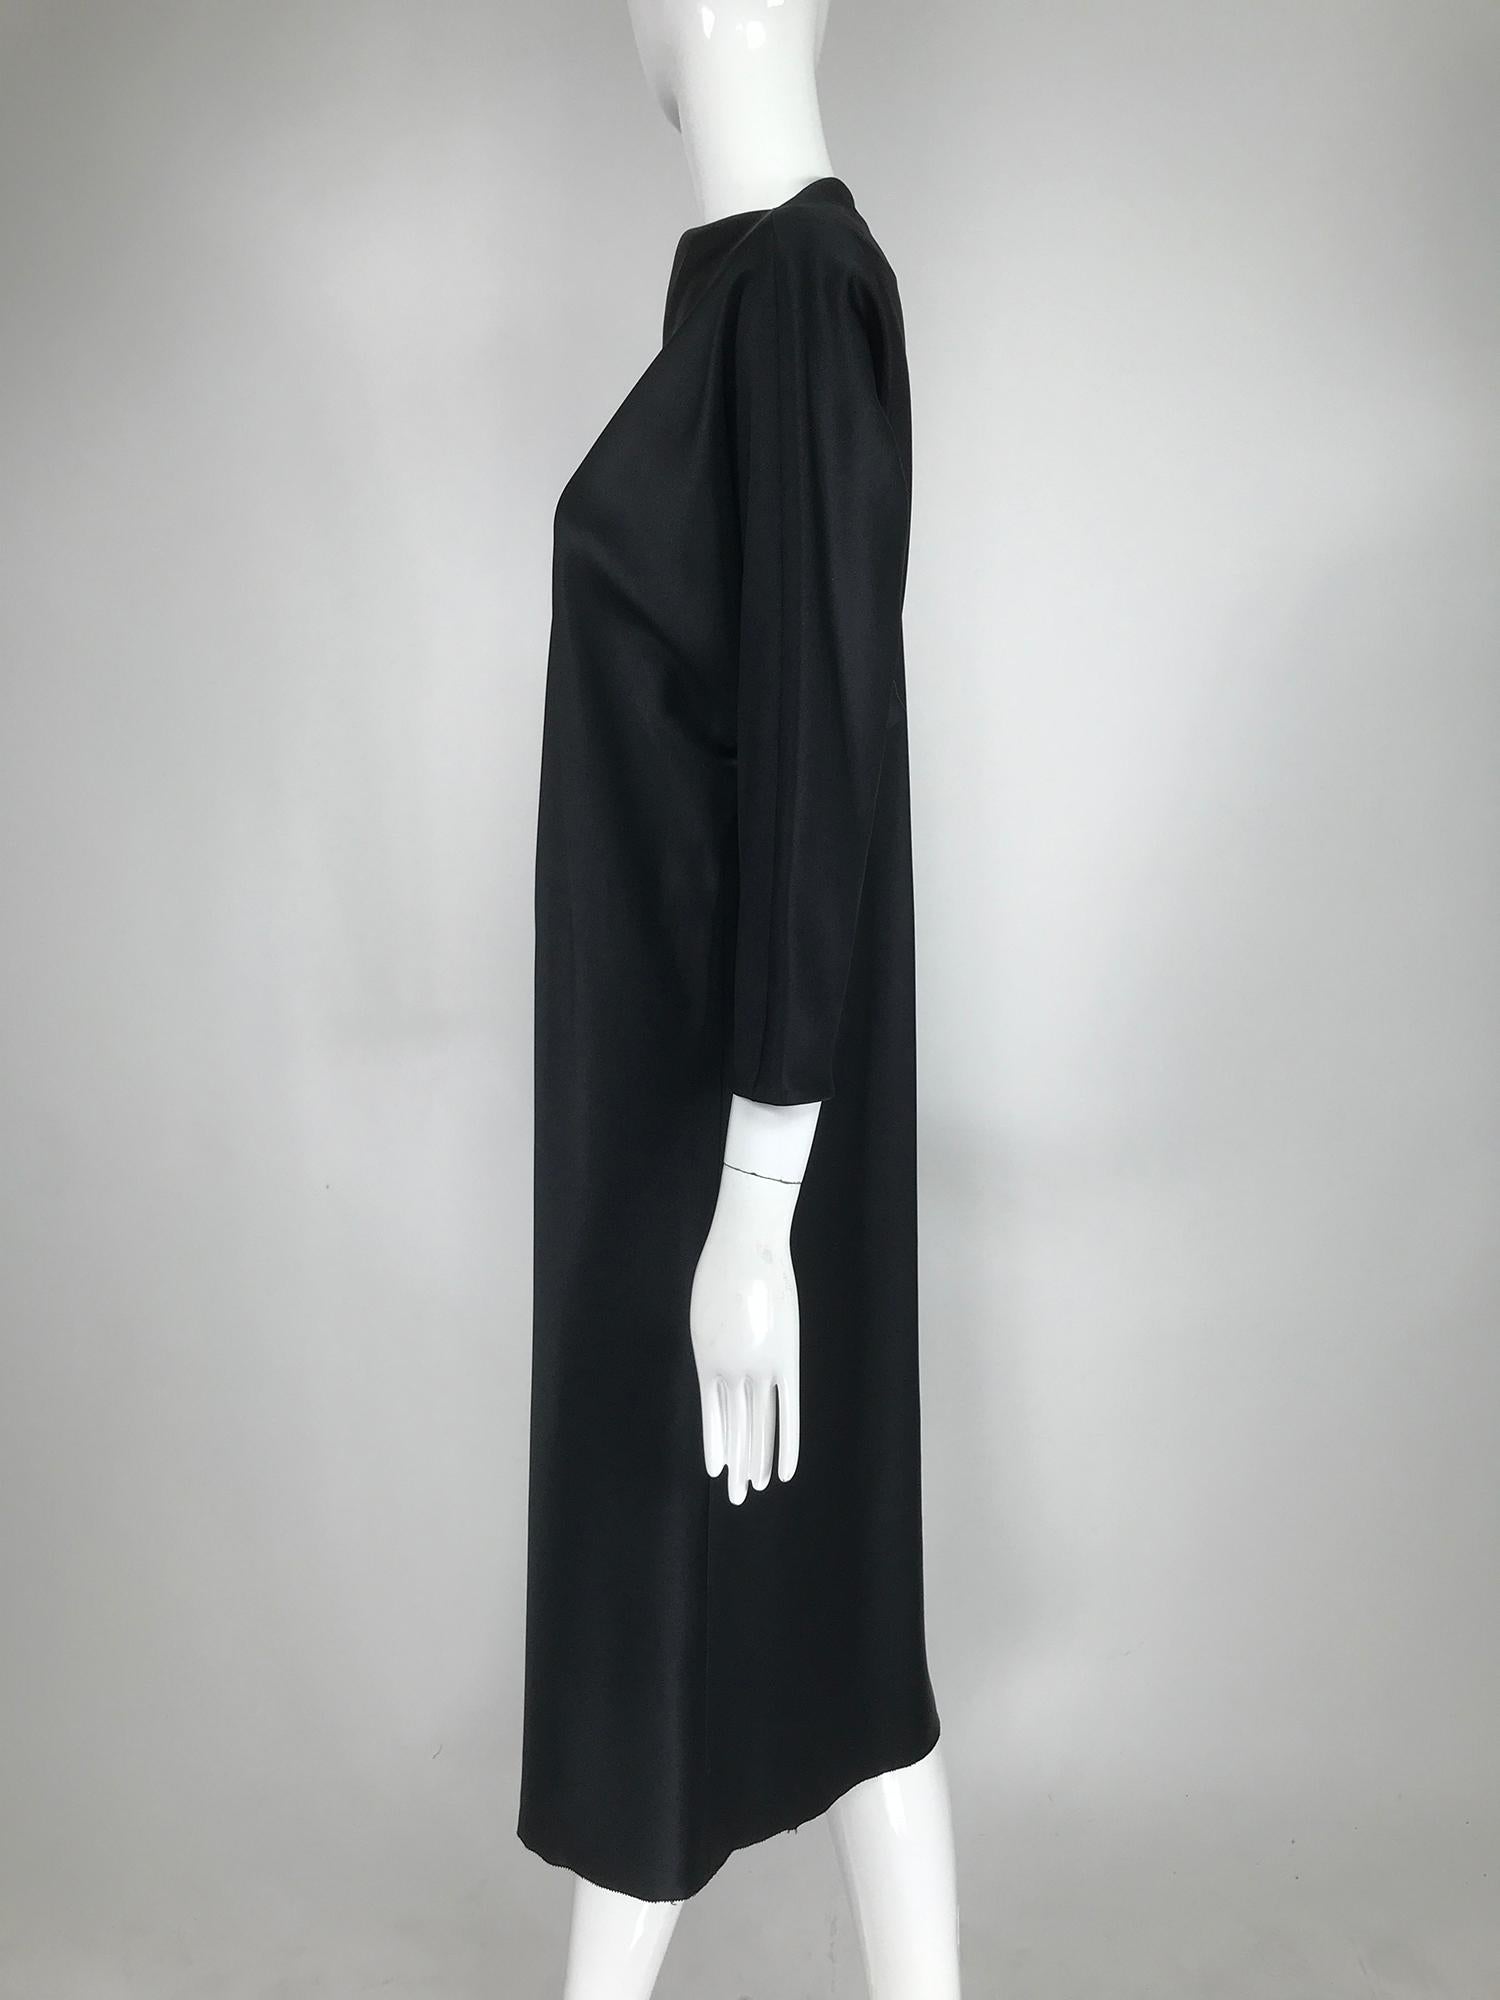 Jackie Rogers classic silky black satin bias cut dress from the 1990s. The perfect black dress to dress up with jewelry and or a belt. The dress slips over the head, the bias cut does the rest. Picot hem. Unlined the fabric is light with a beautiful